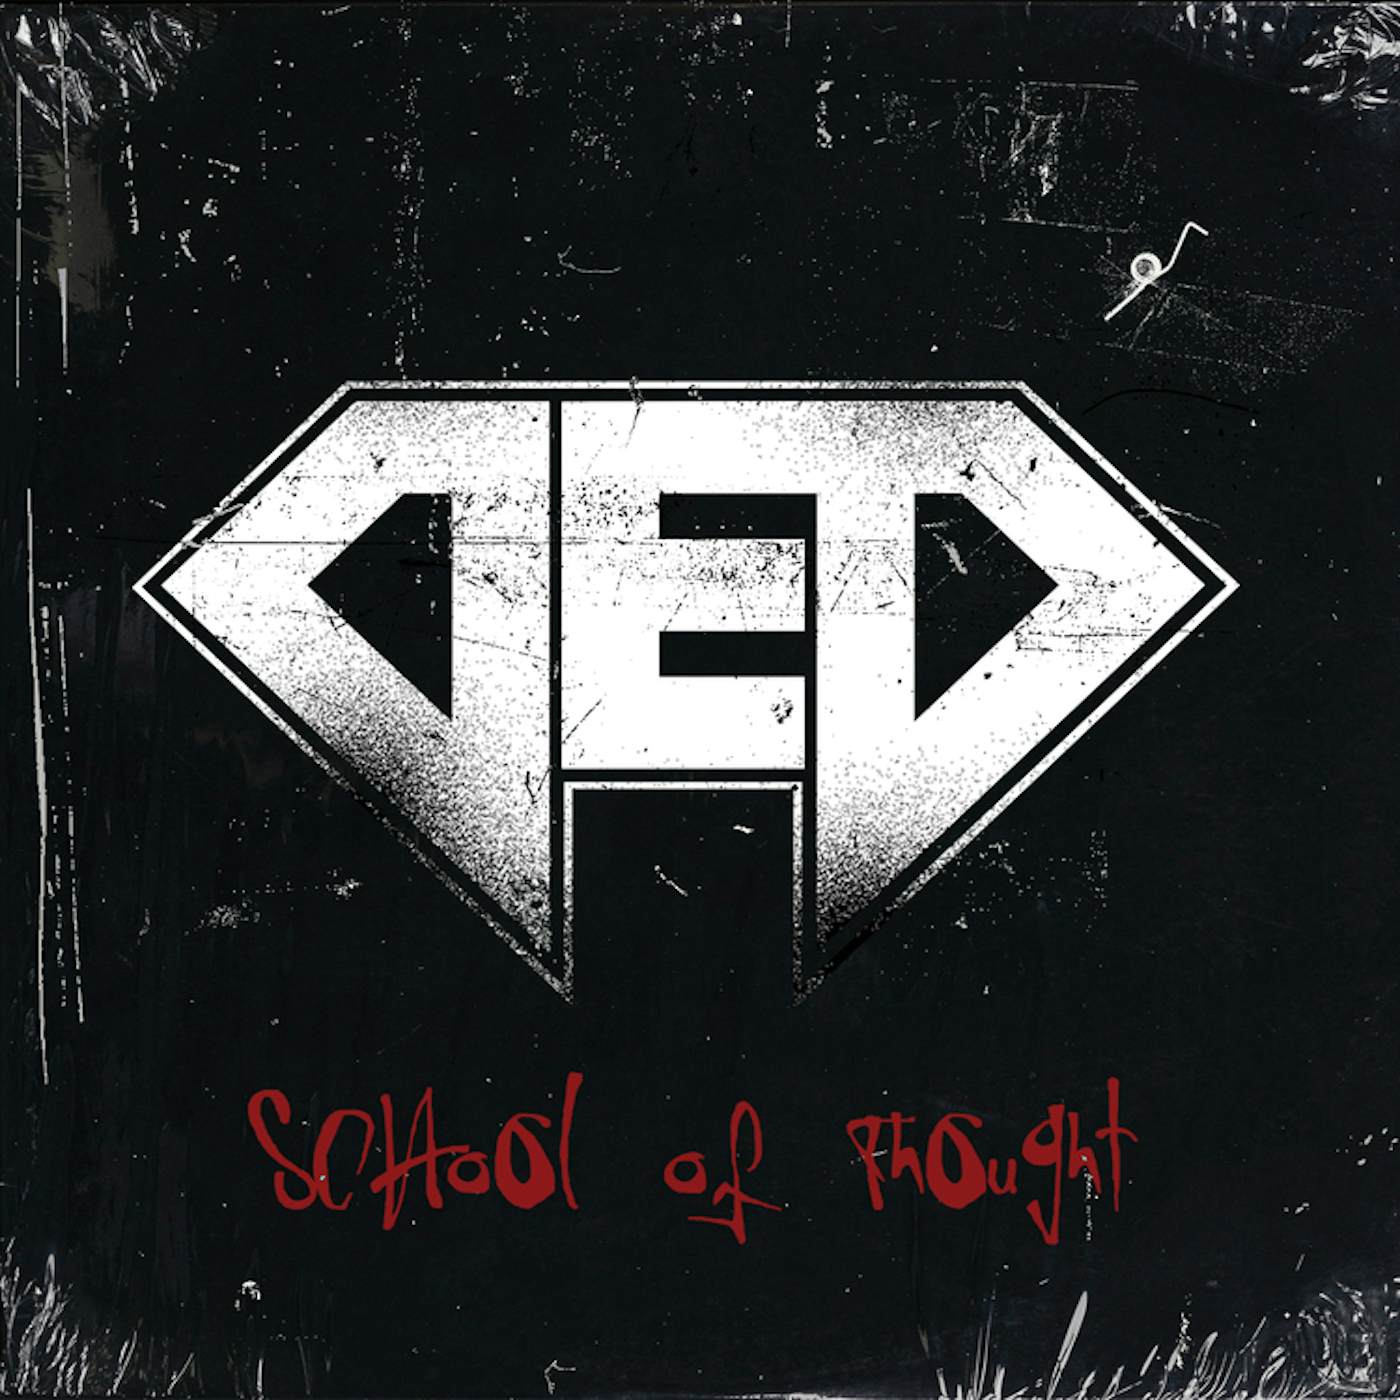 DED SCHOOL OF THOUGHT CD